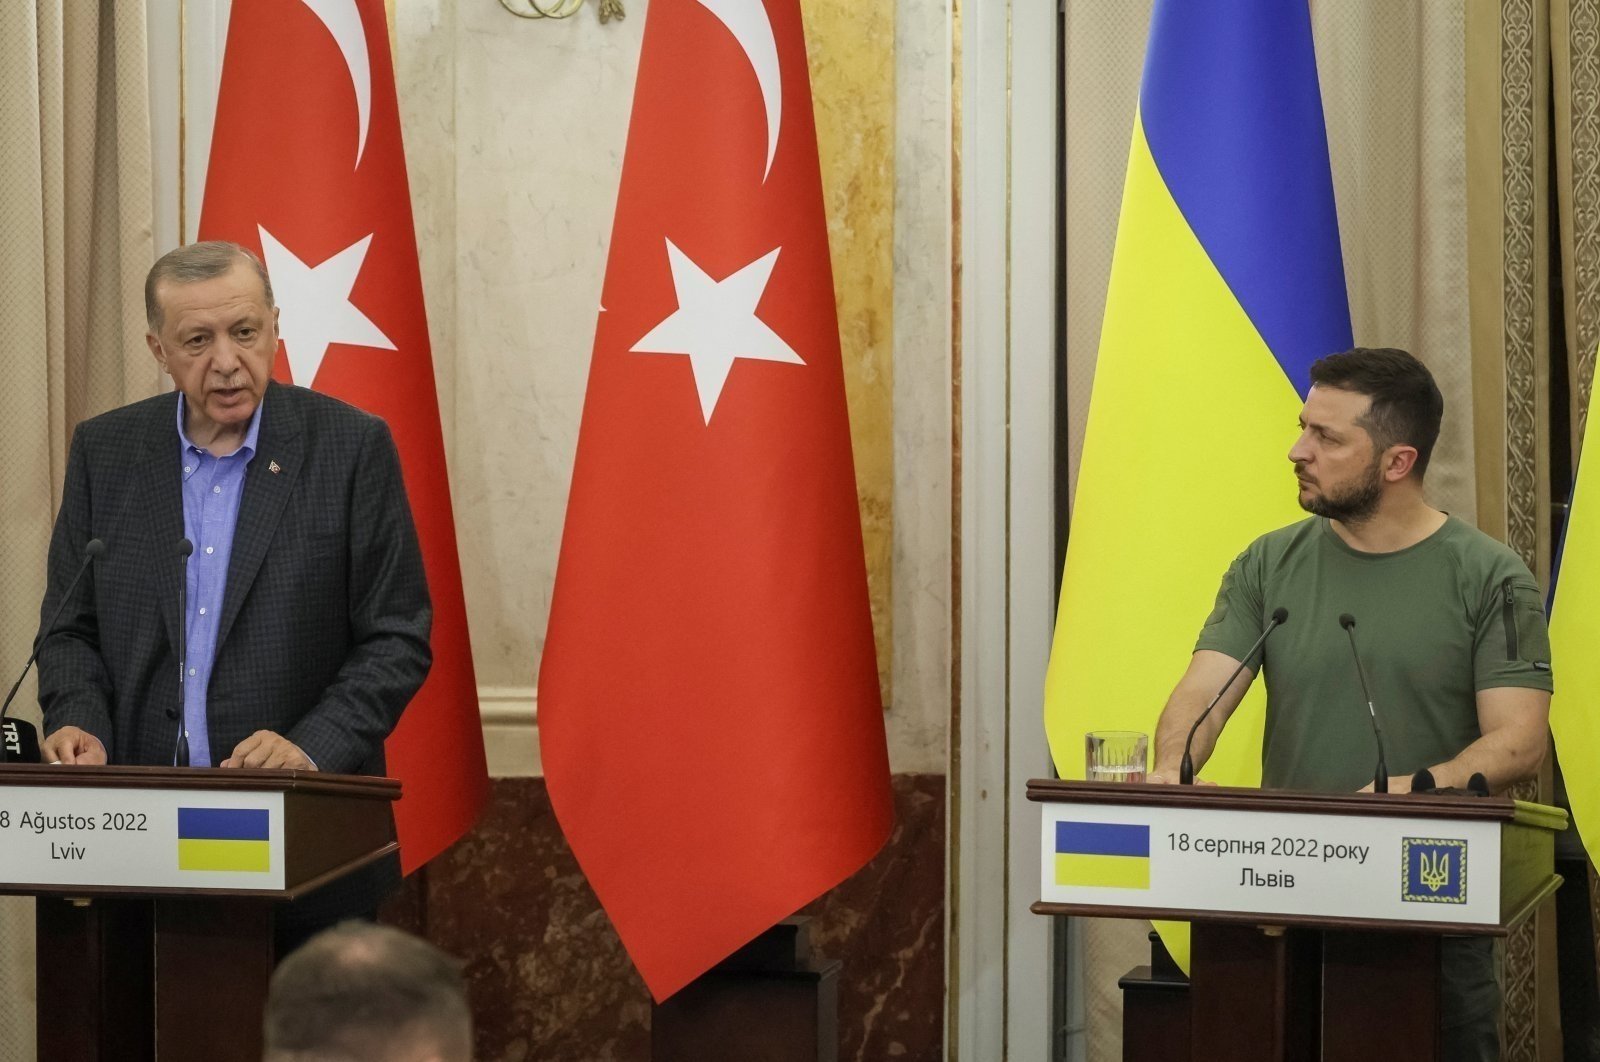 President Recep Tayyip Erdoğan (L), Ukrainian President Volodymyr Zelenskyy (R) and U.N. Secretary-General Antonio Guterres (not pictured) attend a joint news conference following their meeting in Lviv, Ukraine, Aug. 18, 2022. (Reuters File Photo)